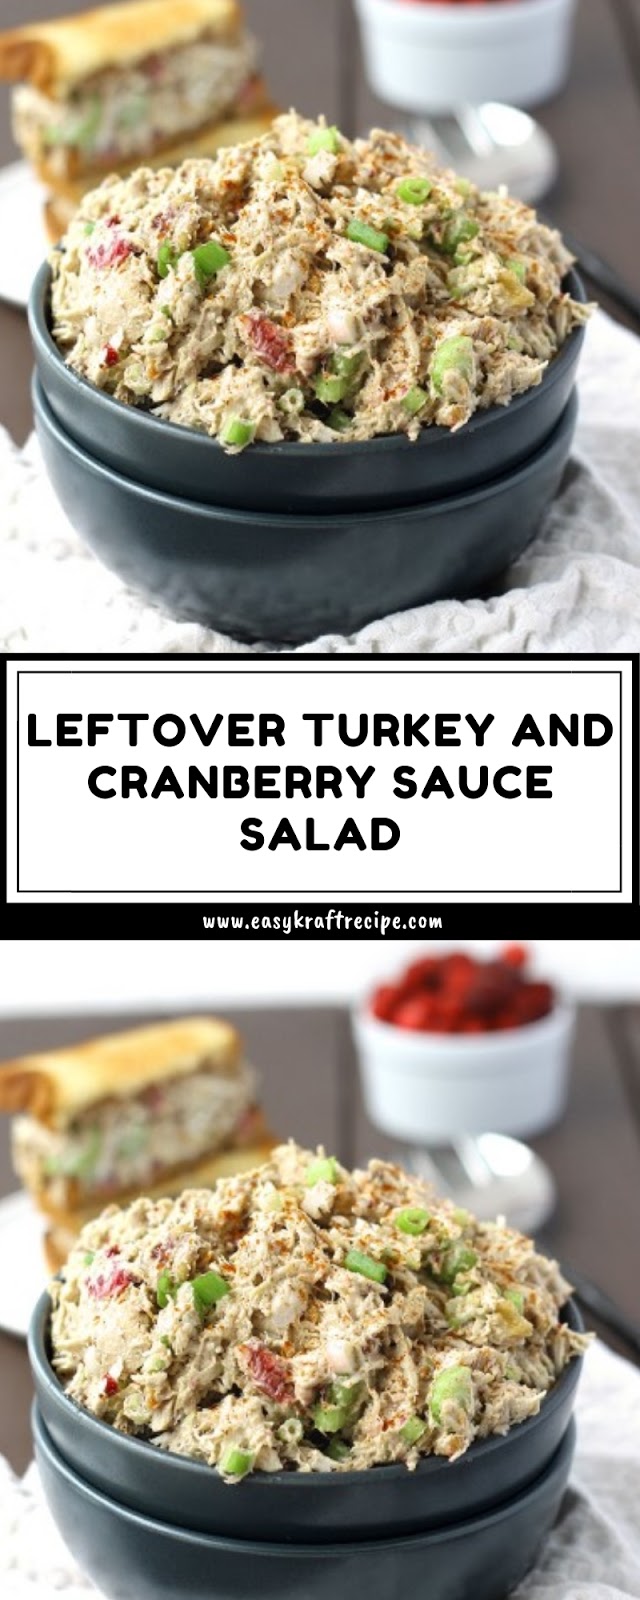 LEFTOVER TURKEY AND CRANBERRY SAUCE SALAD